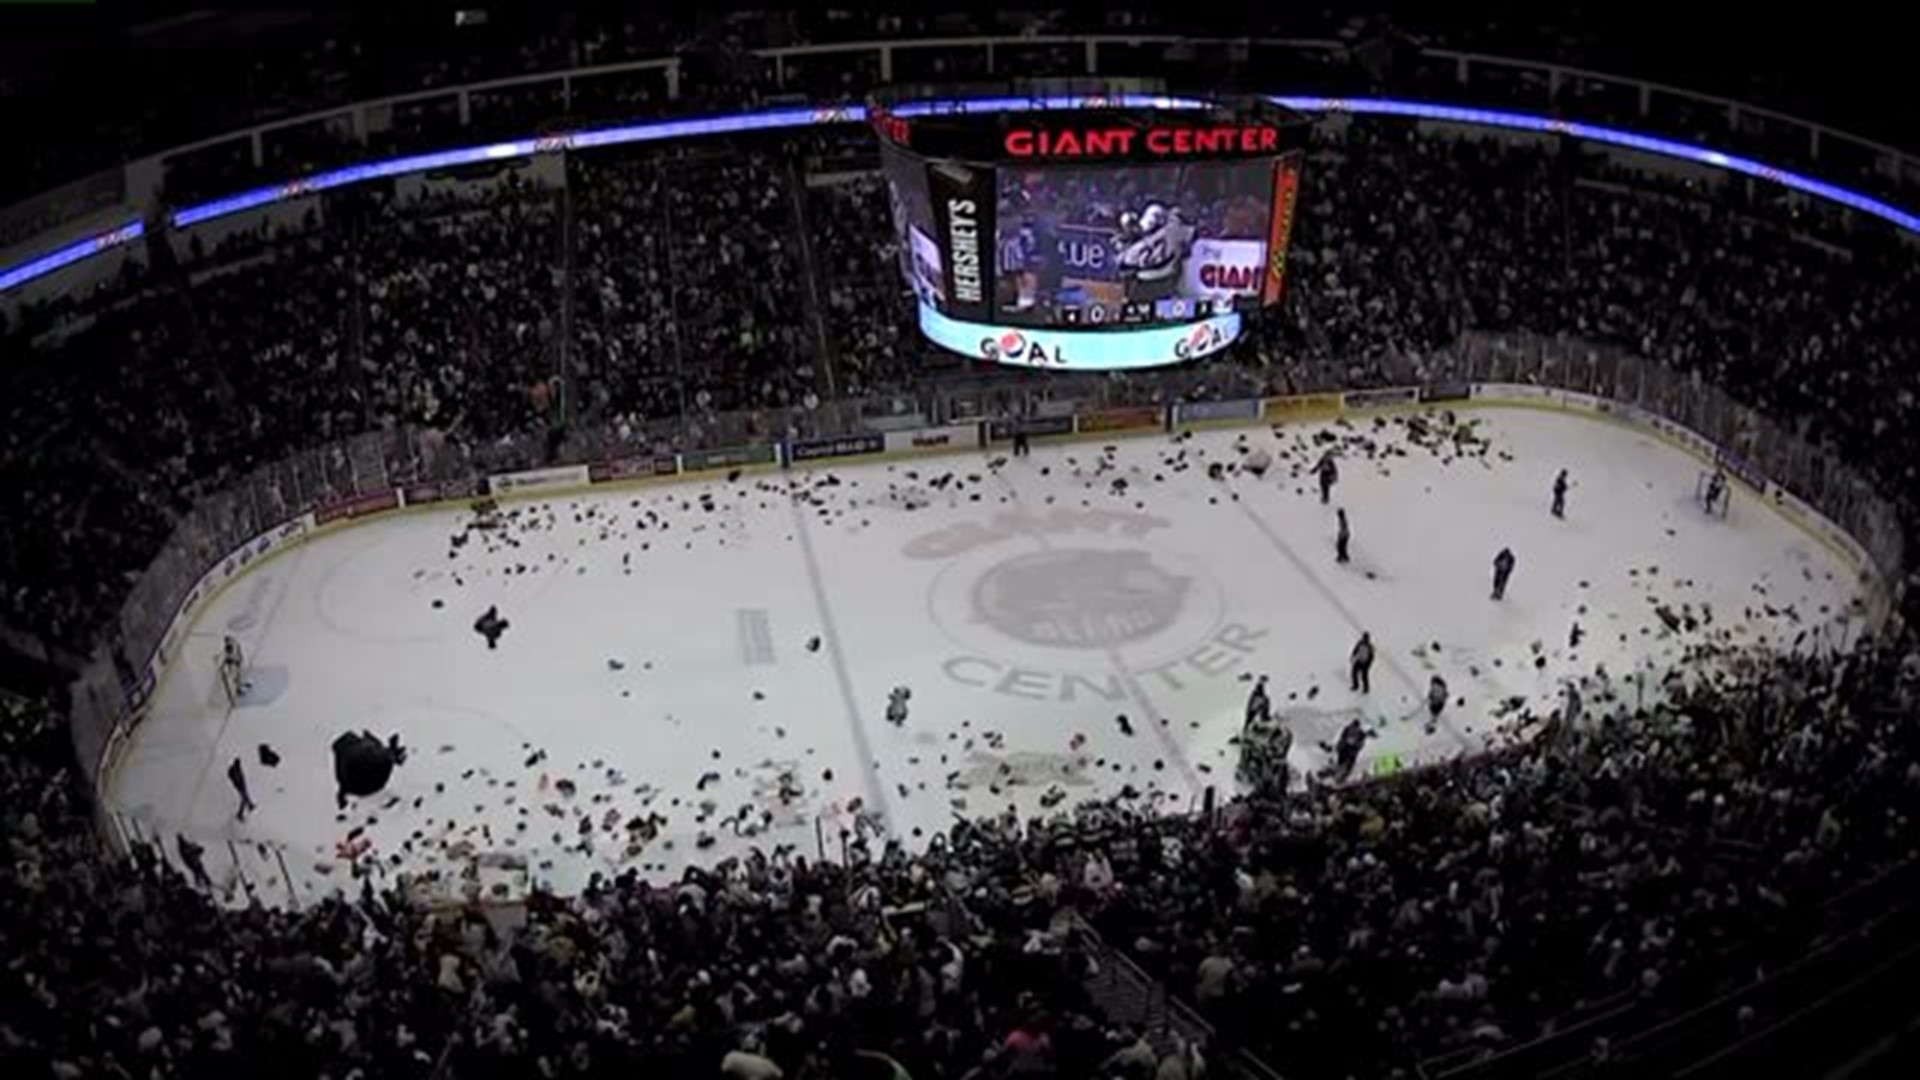 Thousands of teddy bear thrown on ice at Hershey Bears game